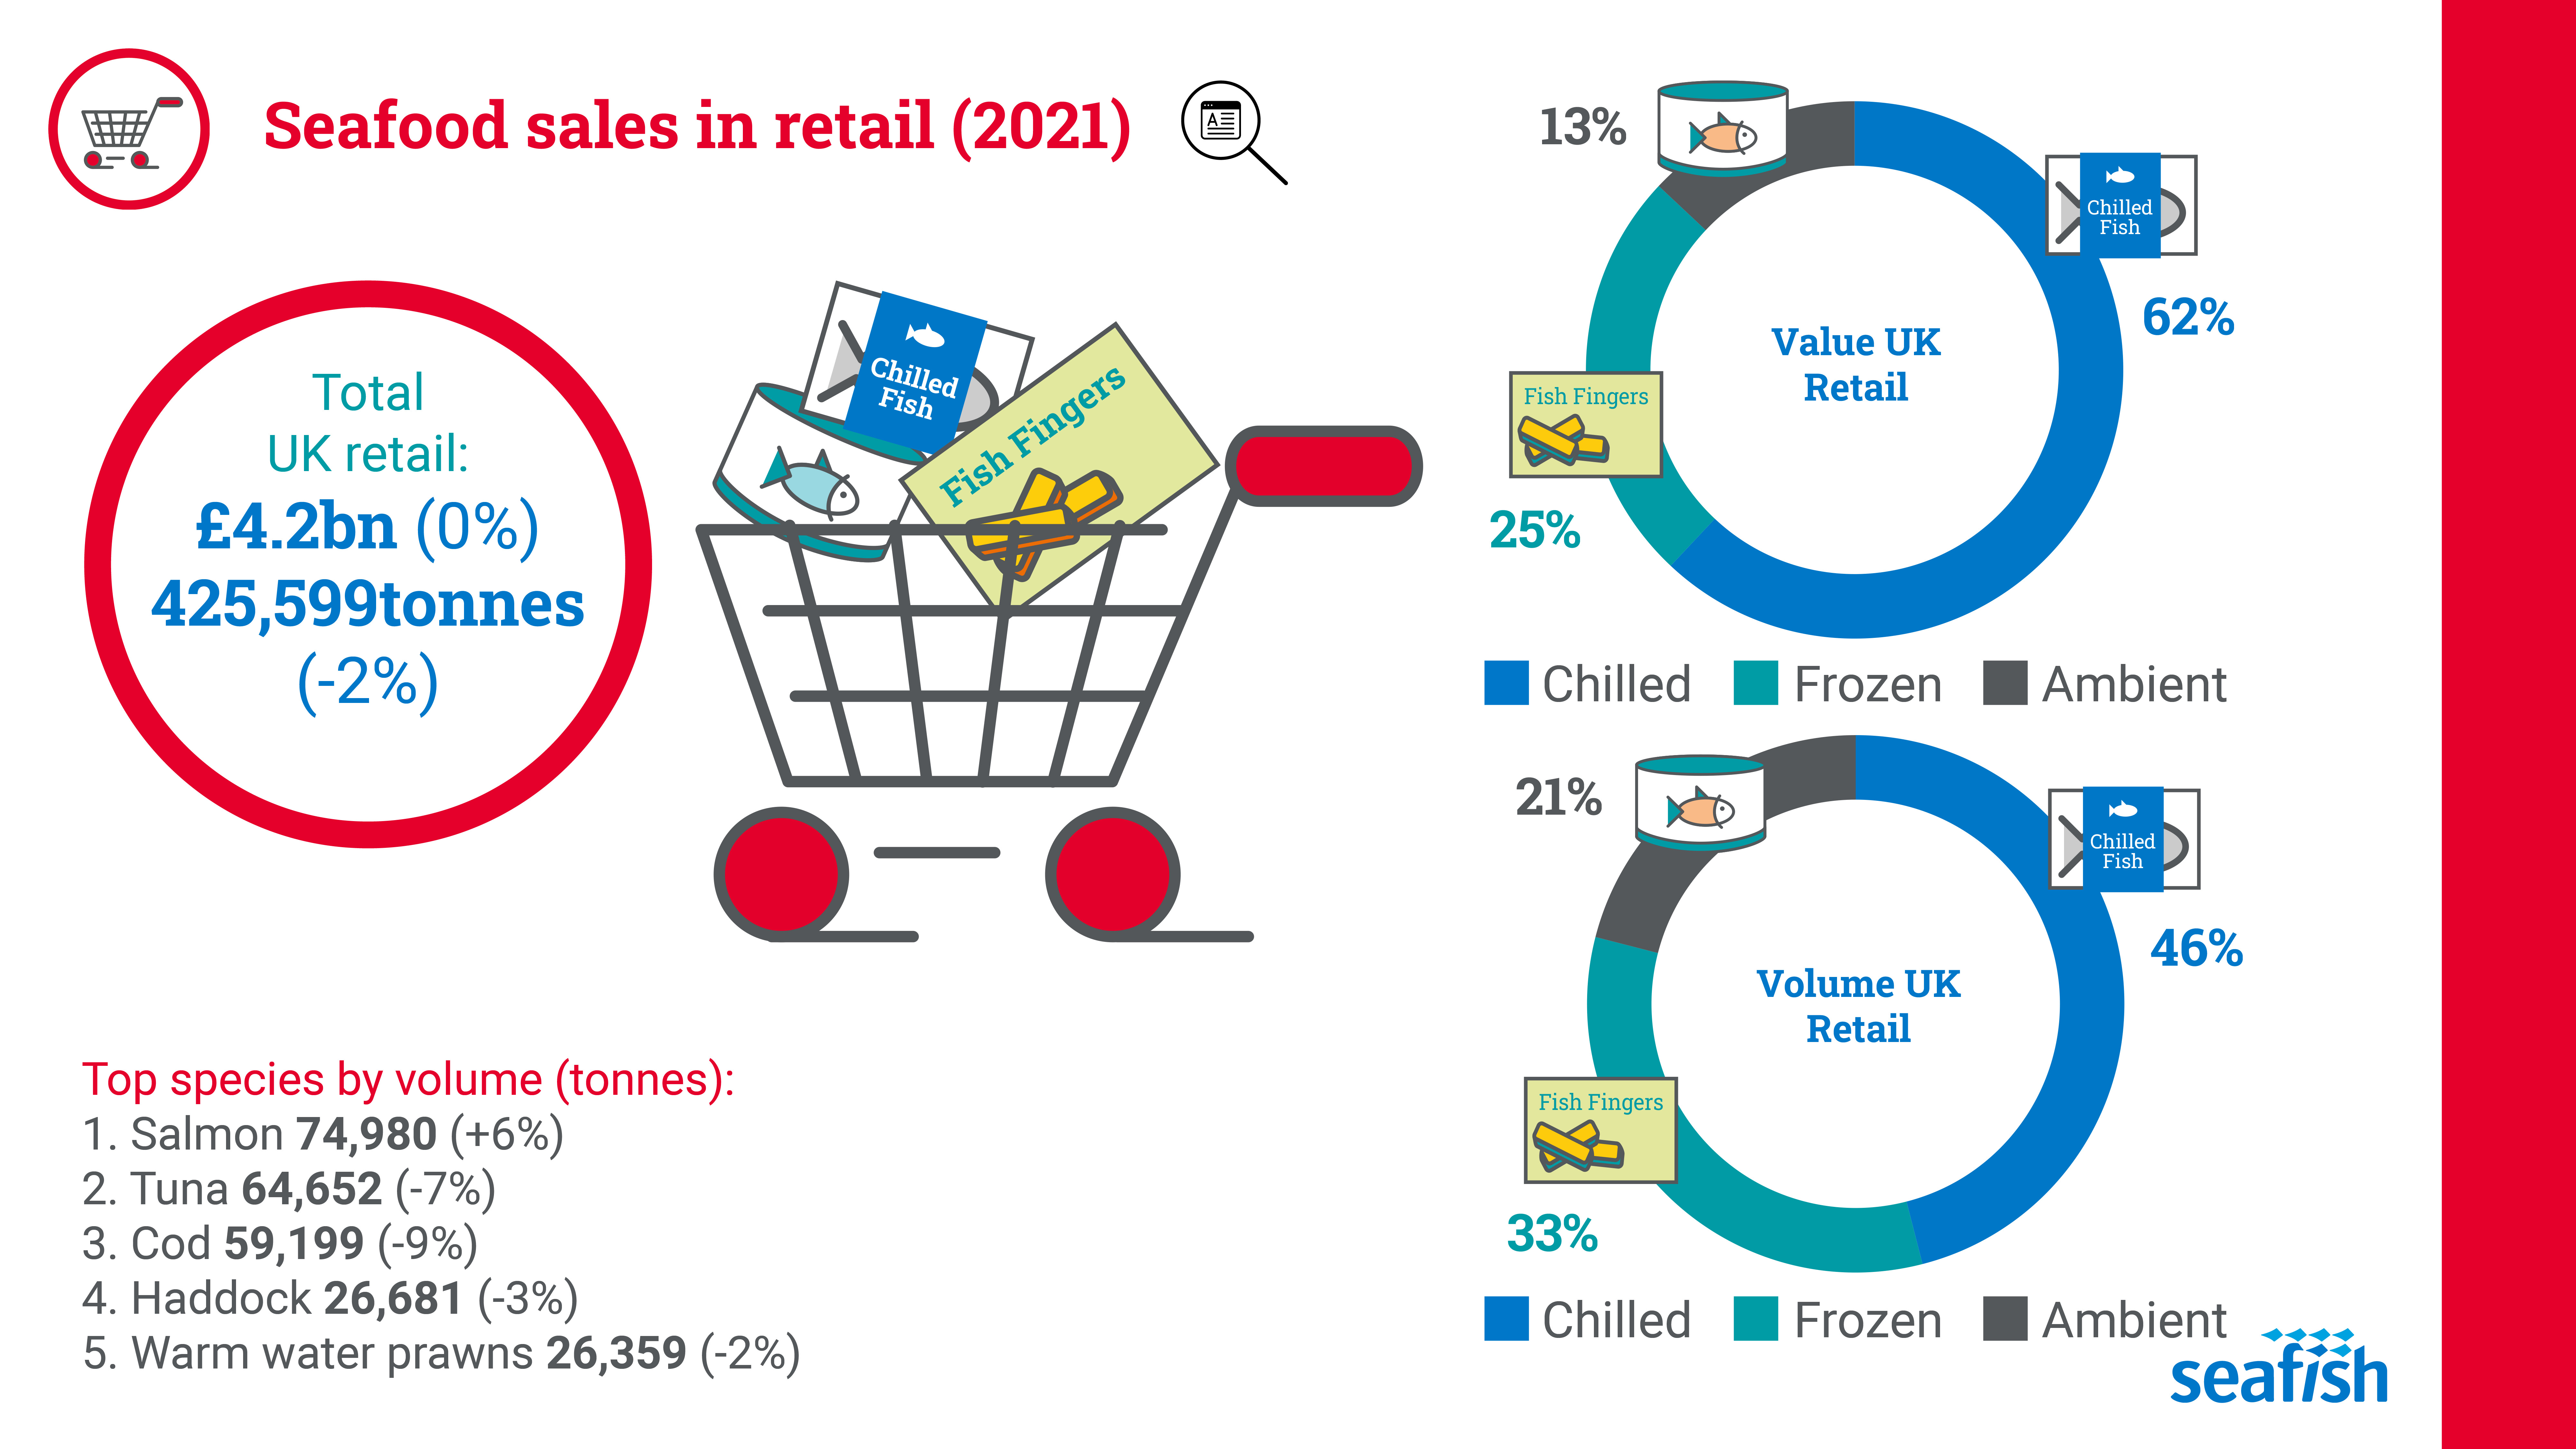 Seafood sales in retail by value and volume in 2021